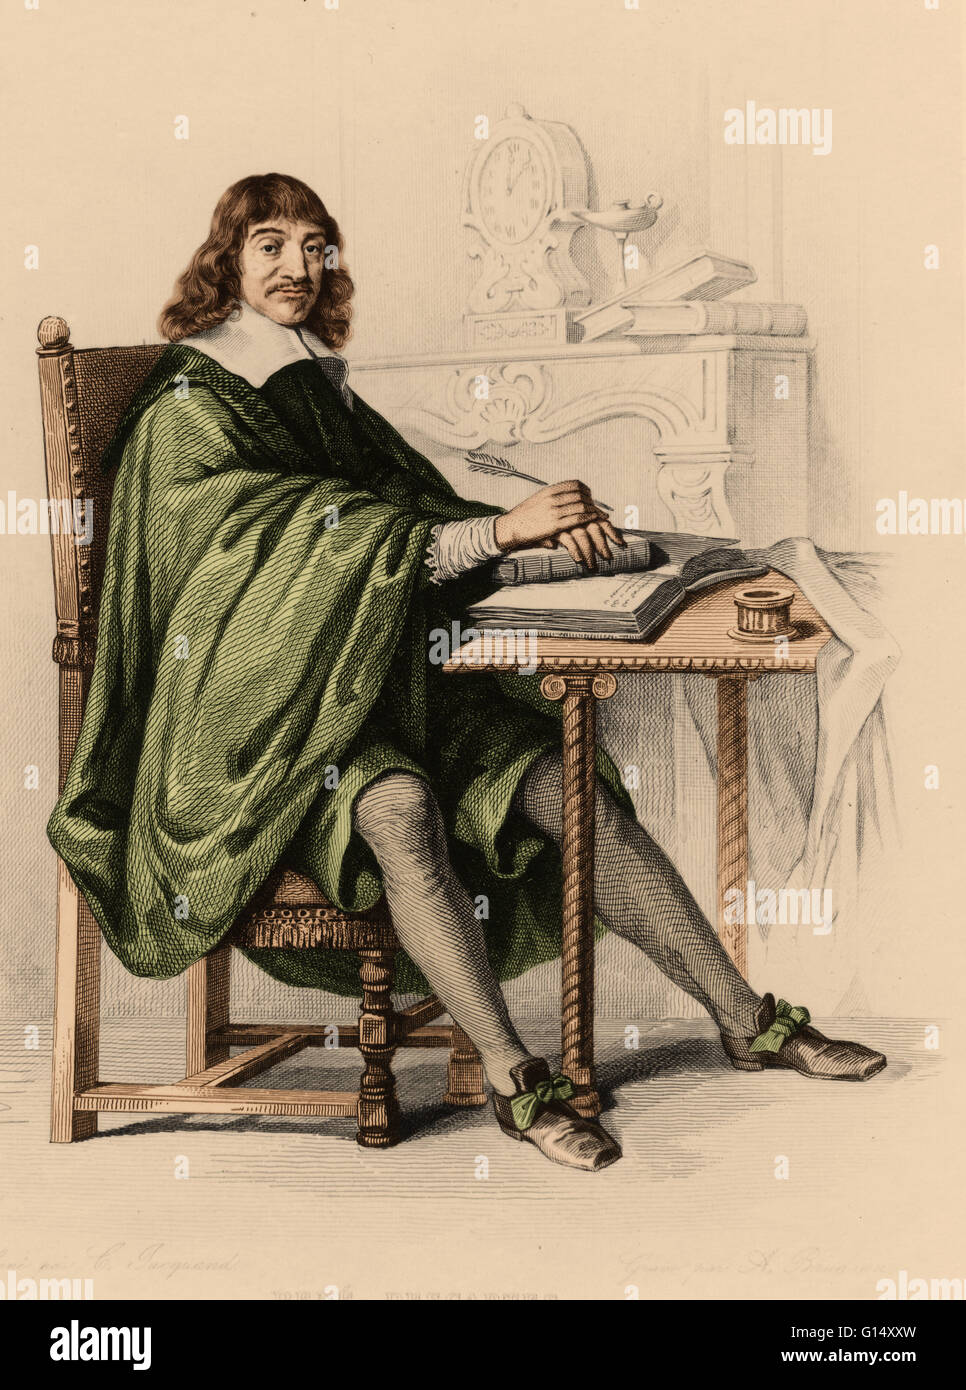 René Descartes (March 31, 1596 - February 11, 1650) was a French mathematician, philosopher and physiologist. Living on his modest inherited wealth, Descartes traveled, studied, wrote, and served as a soldier in Holland, Bohemia and Hungary. He created an Stock Photo